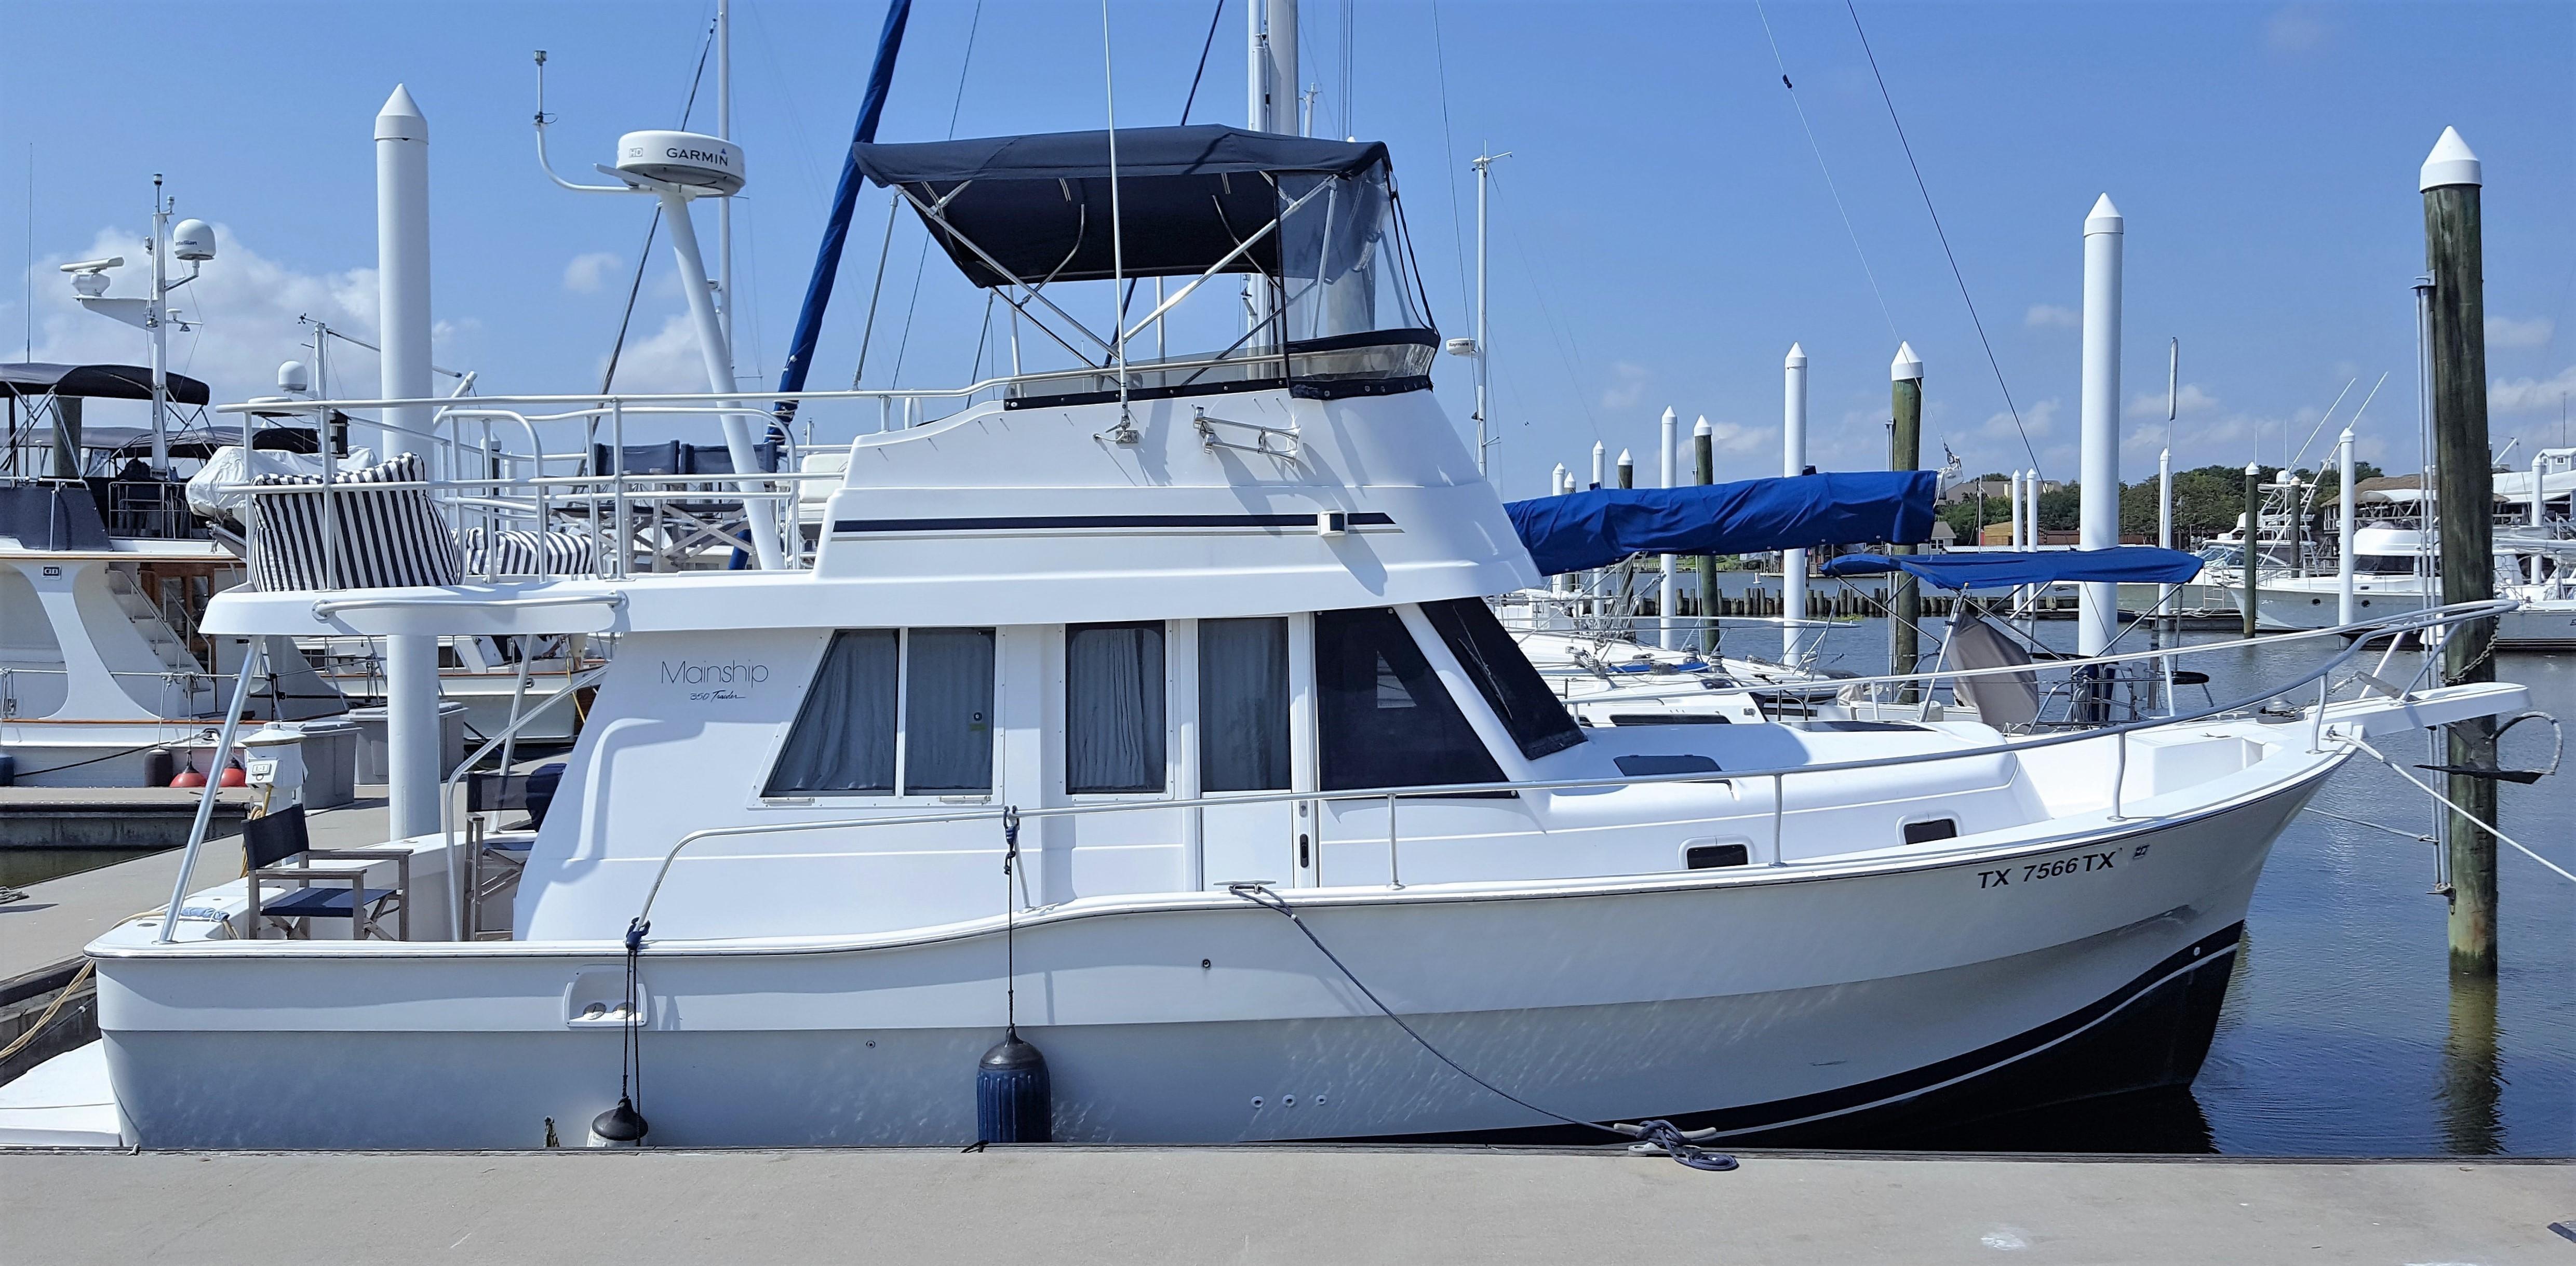 35 ft yacht for sale